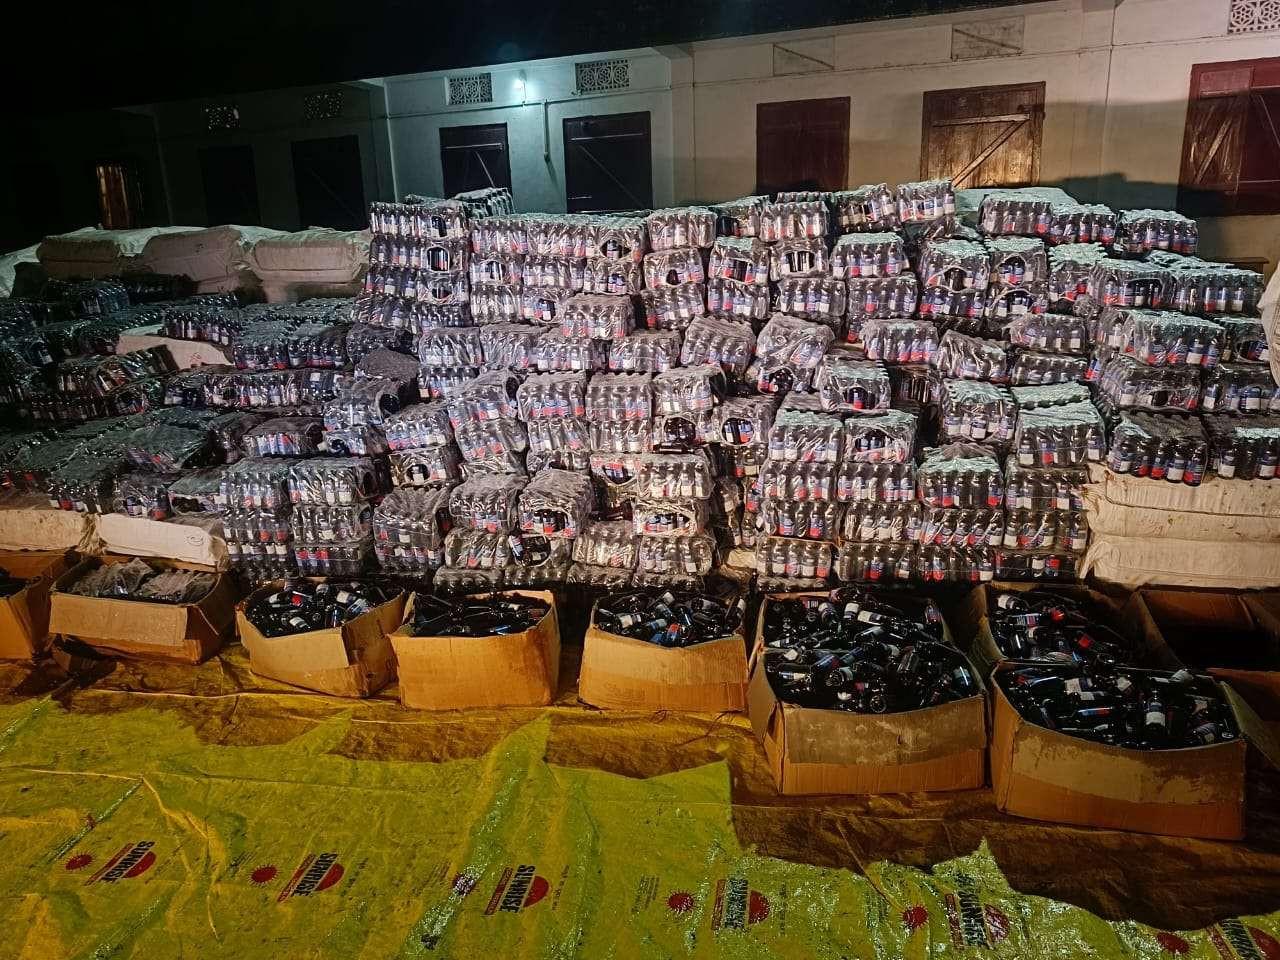 Over 44,000 bottles of banned Phensedyl seized in East Jaintia Hills after highway chase